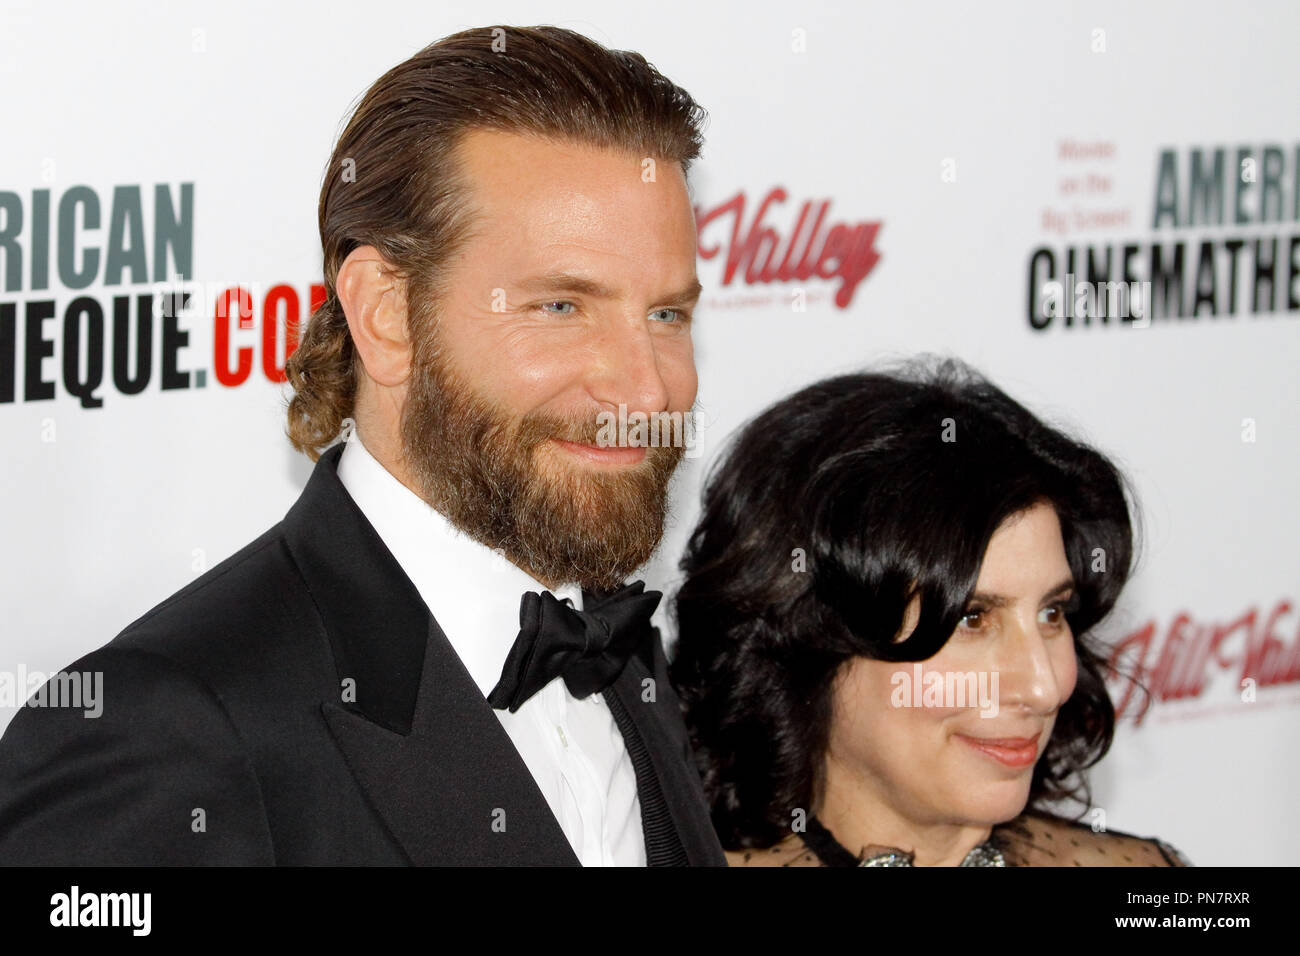 Bradley Cooper and Sue Kroll at the 30th Annual American Cinematheque Award and Fundraiser honoring Ridley Scott held at the Beverly Hilton Hotel in Beverly Hills, CA, October 14, 2016. Photo by Joe Martinez / PictureLux Stock Photo